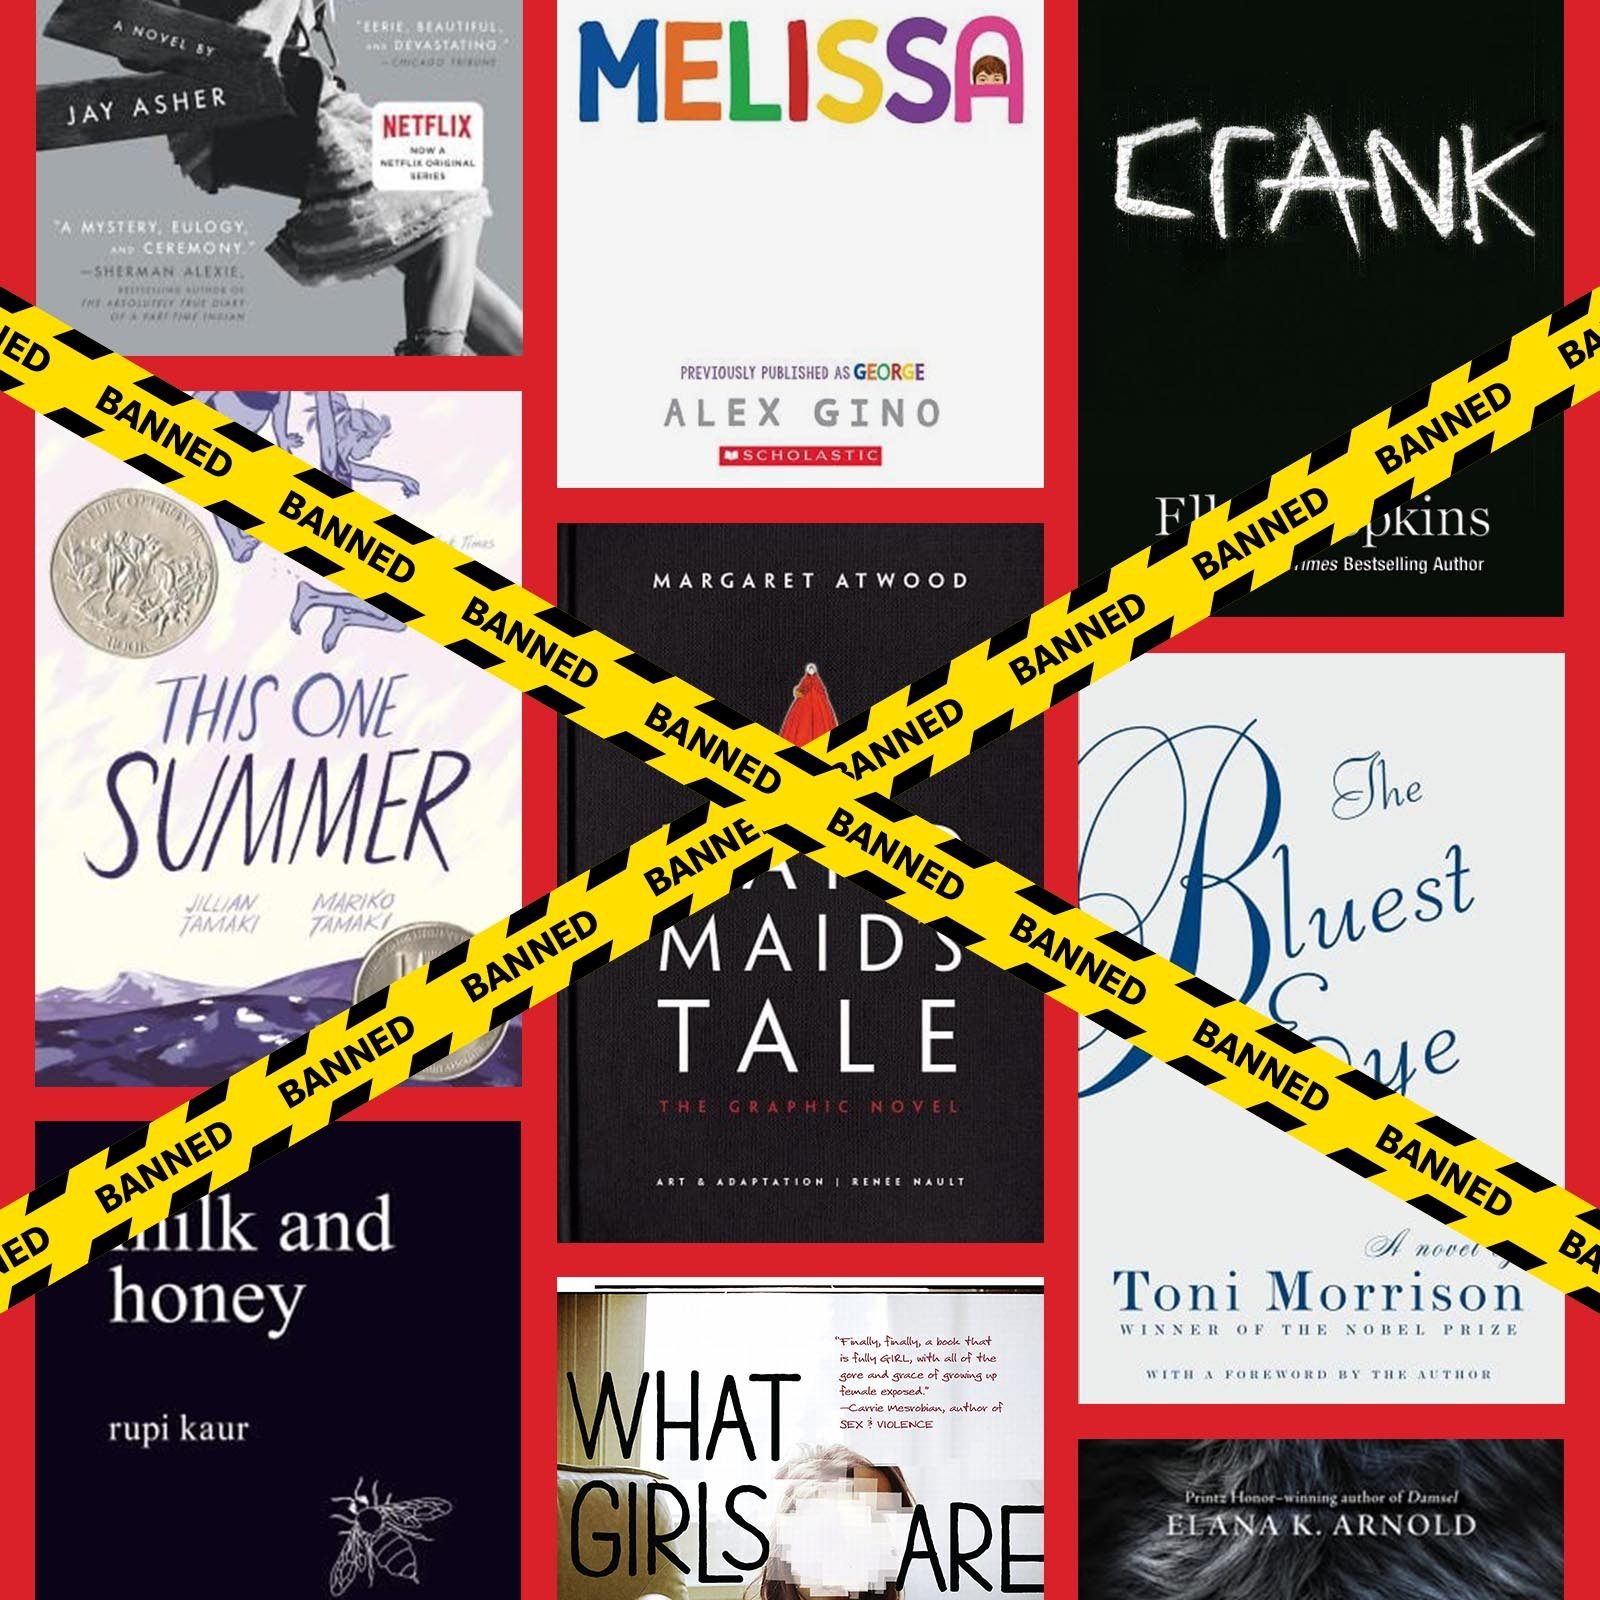 The 50 Most Banned Books in America 2023 How Many Have You Read?